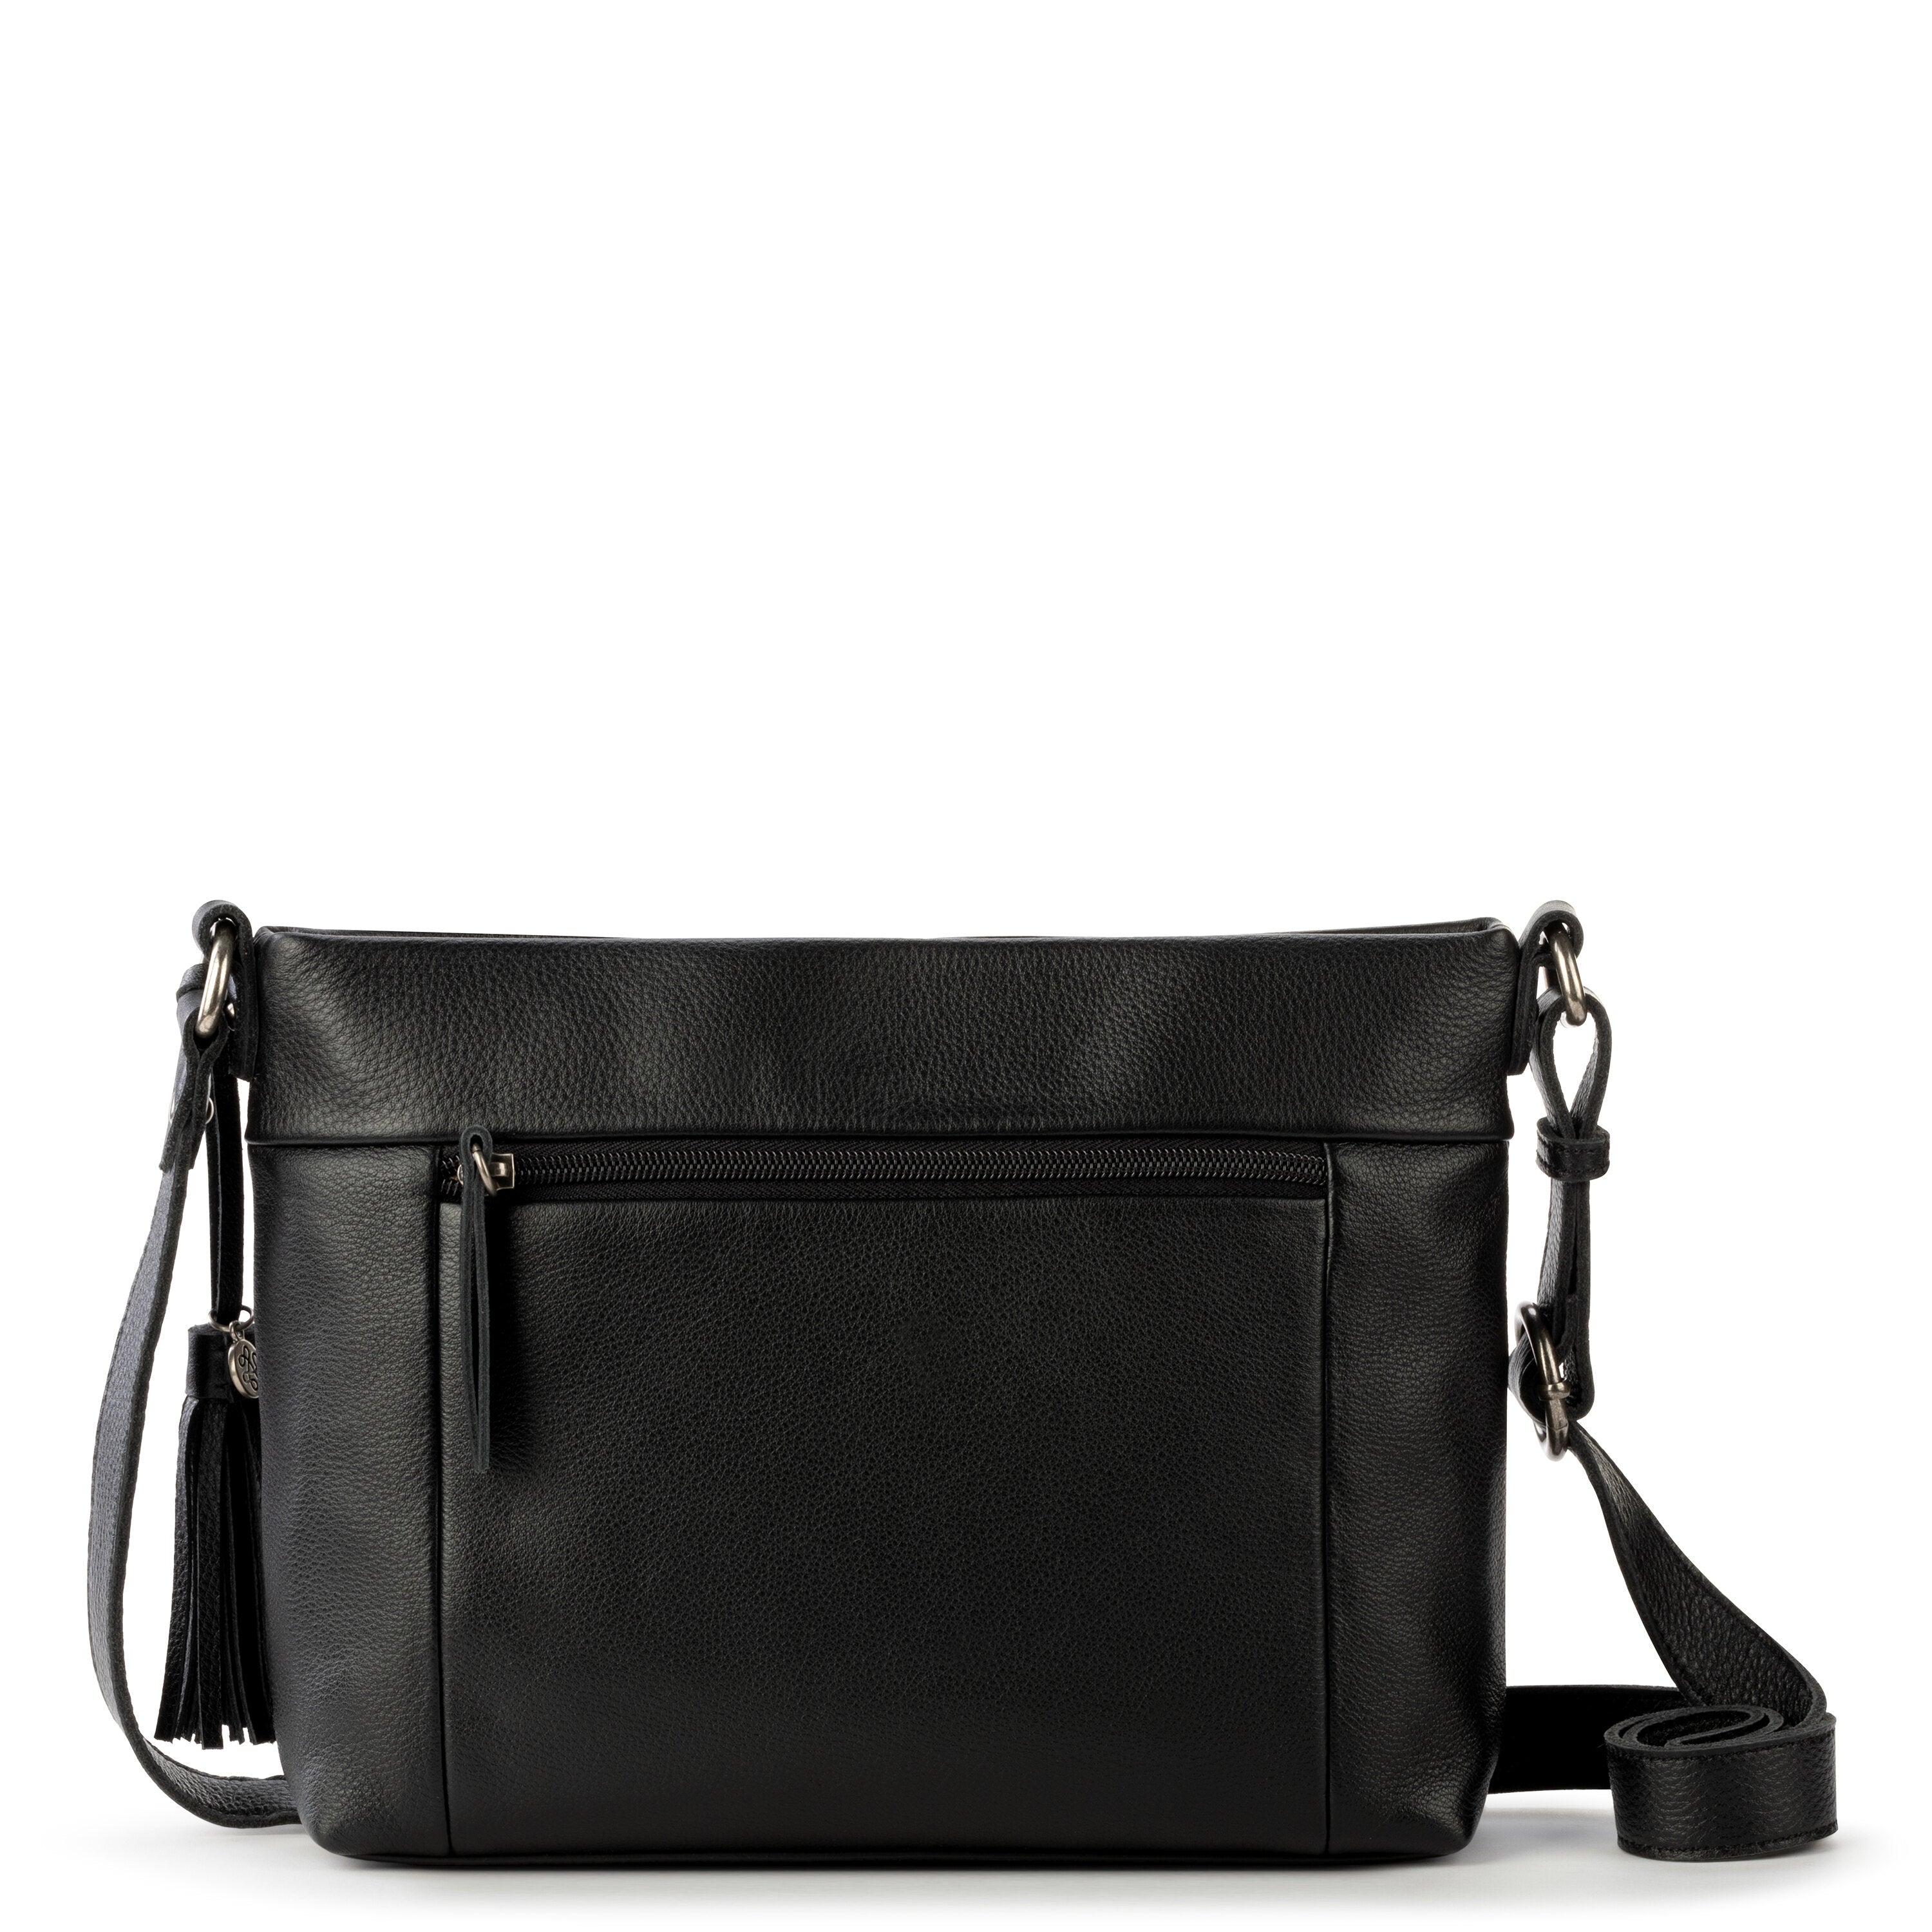 The Sak Bags 50% Off at Macy's - Deals Finders